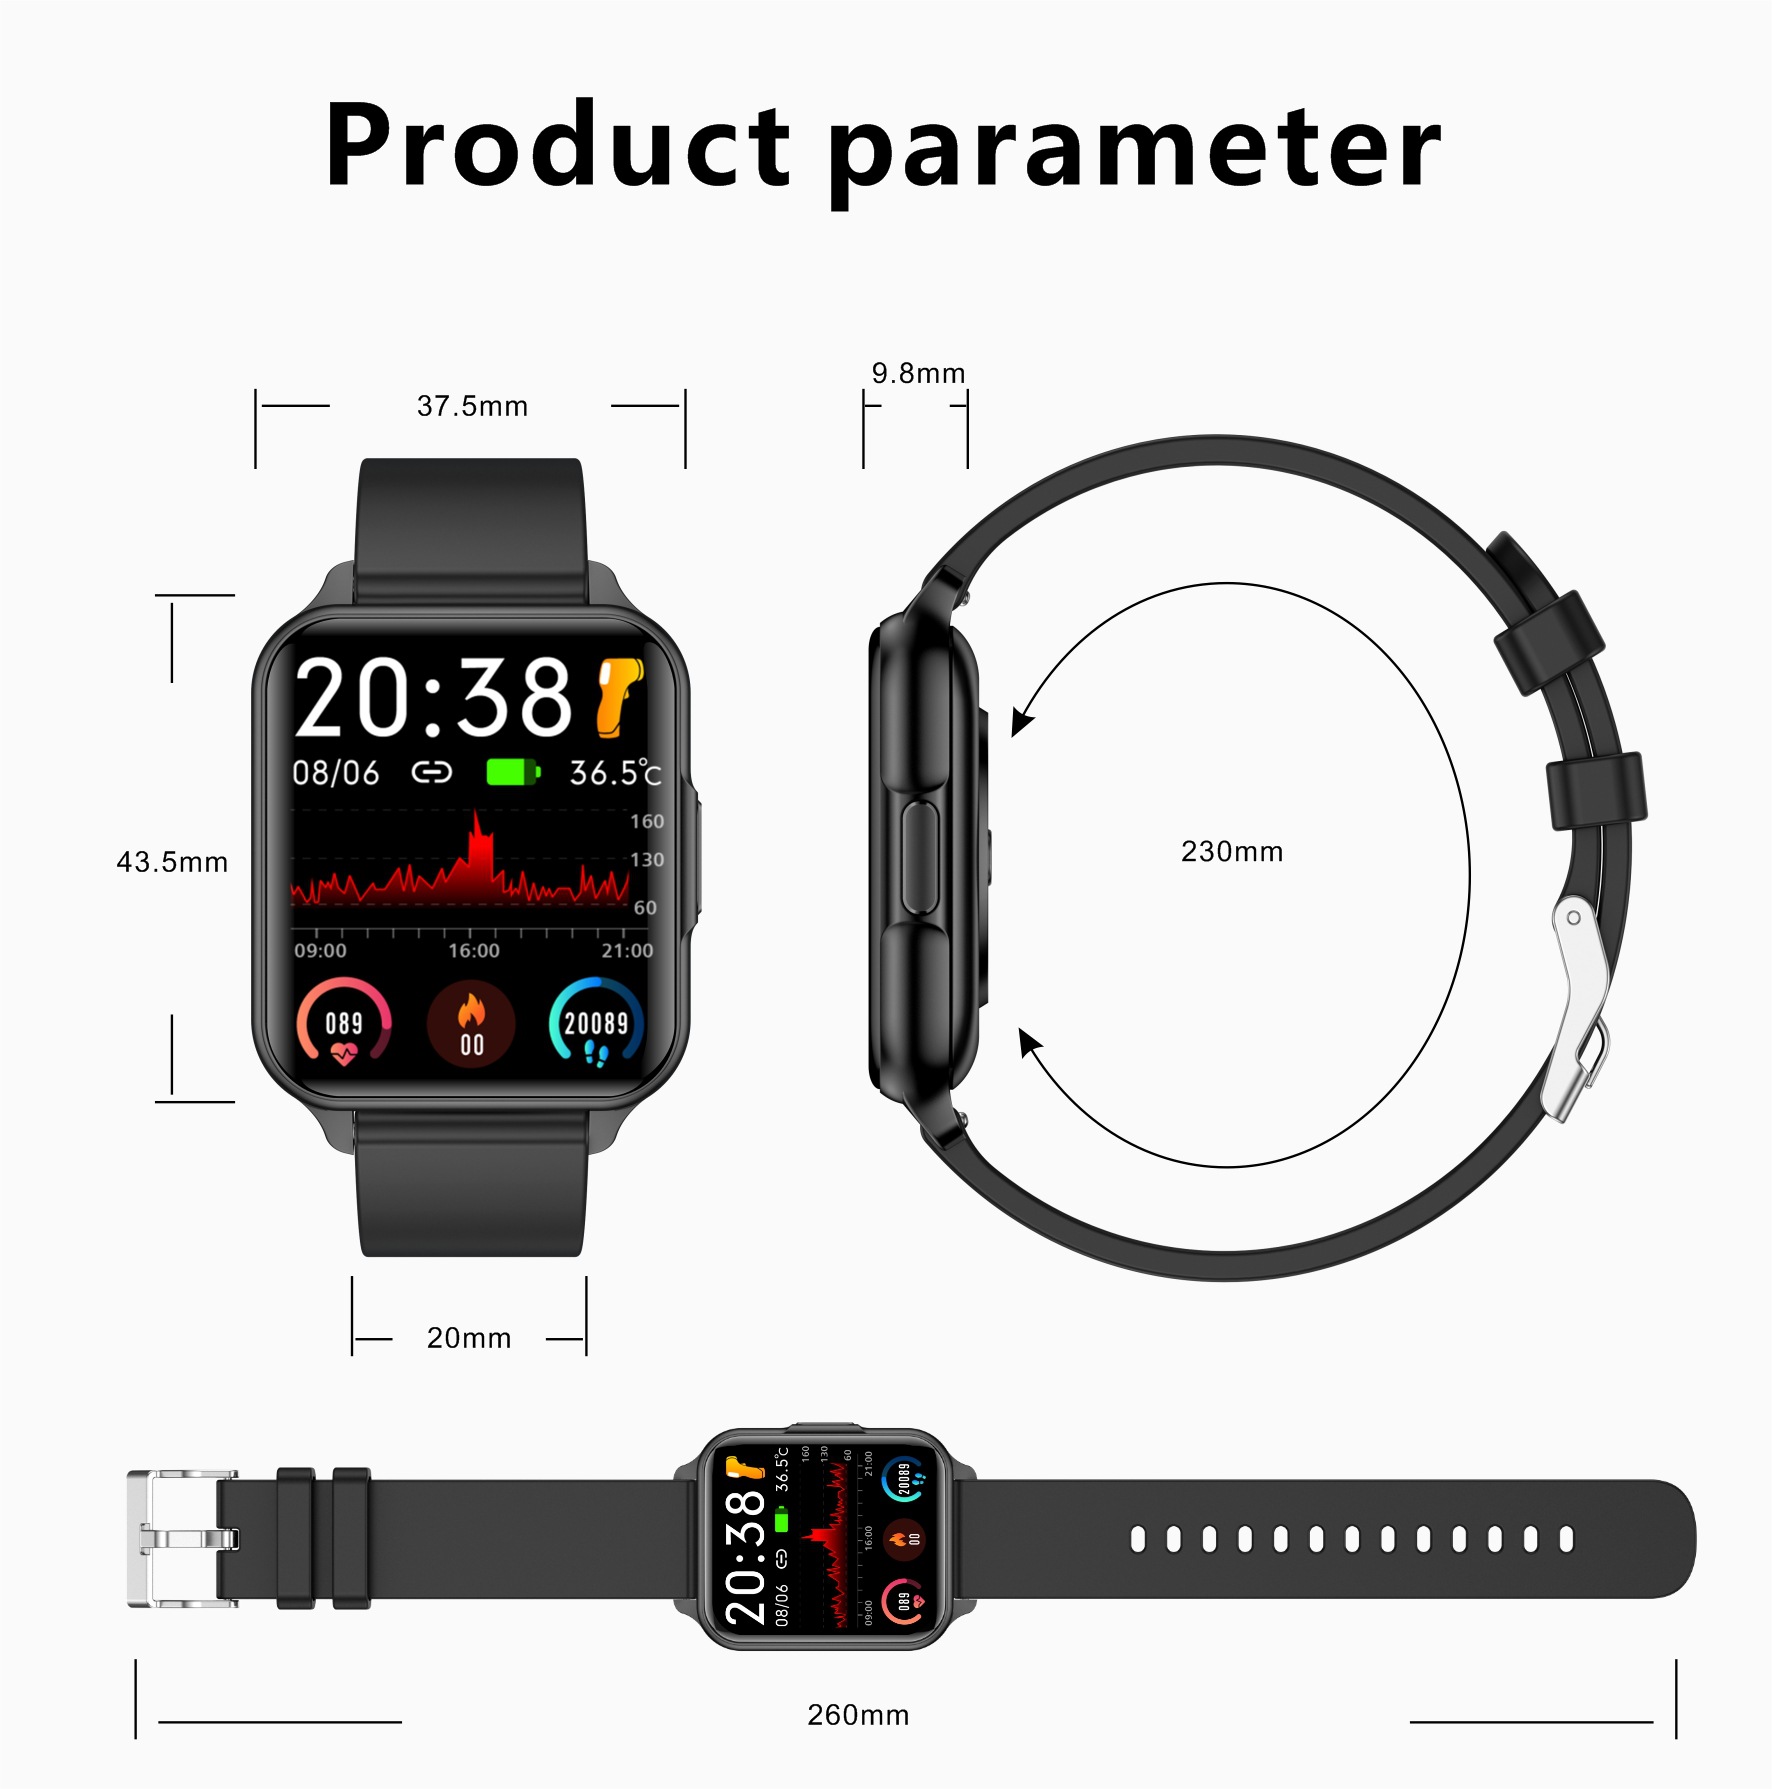 Q26 Pro 1.83 inch Screen Body Temperature Heart Rate Heart Rate Blood Pressure SpO2 Monitor 45 Days Long Standby Customized Dials Smart Watch